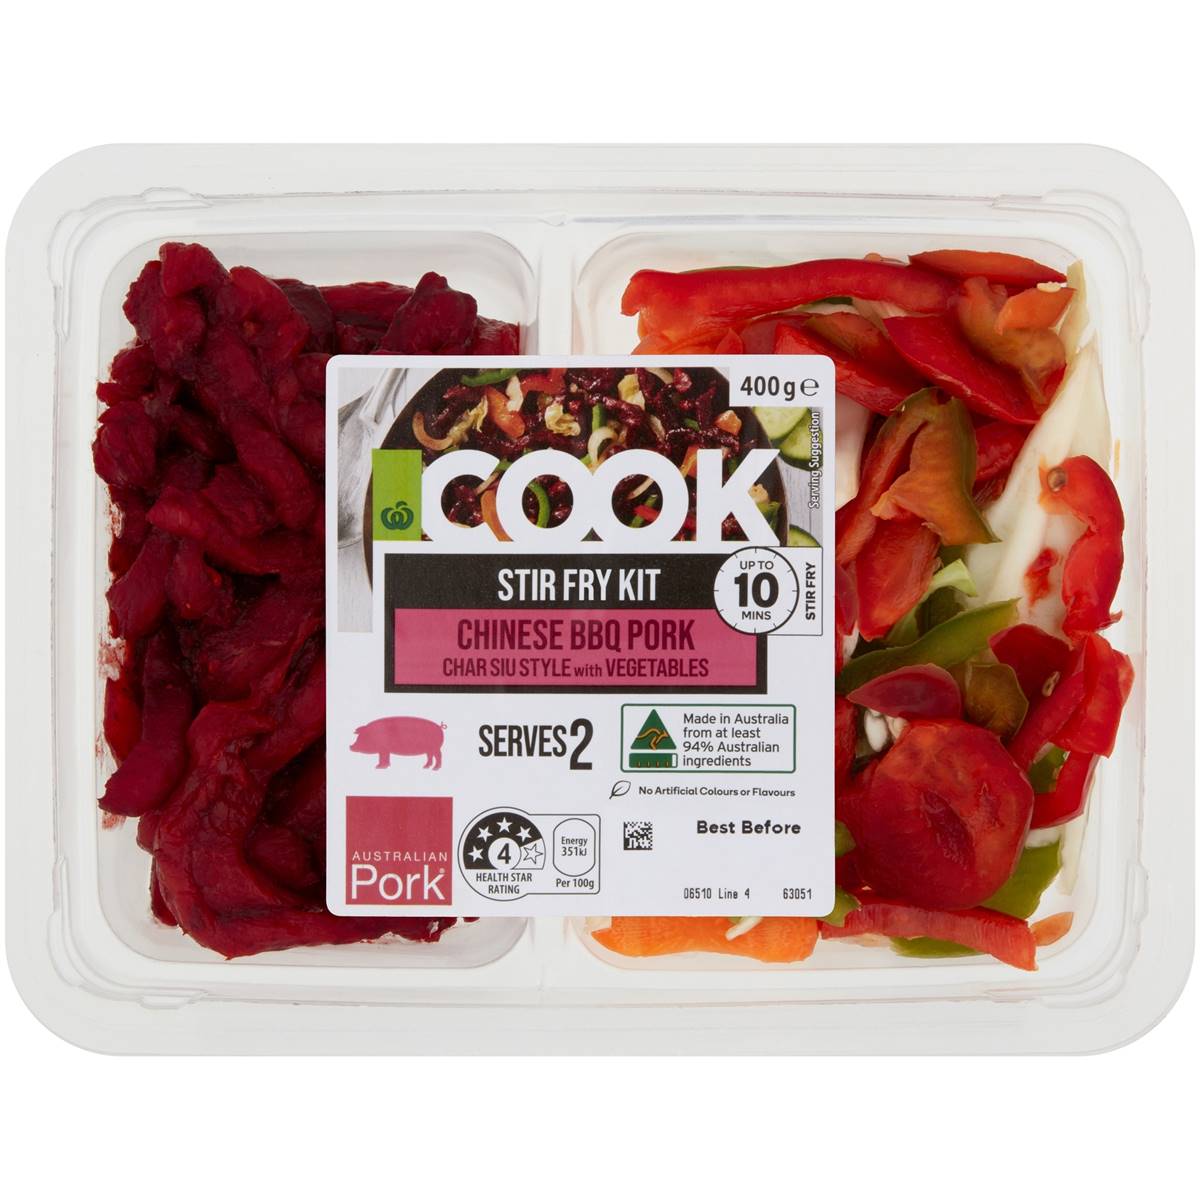 Woolworths Cook Stir Fry Kit Chinese Bbq Pork Char Siu With Veges